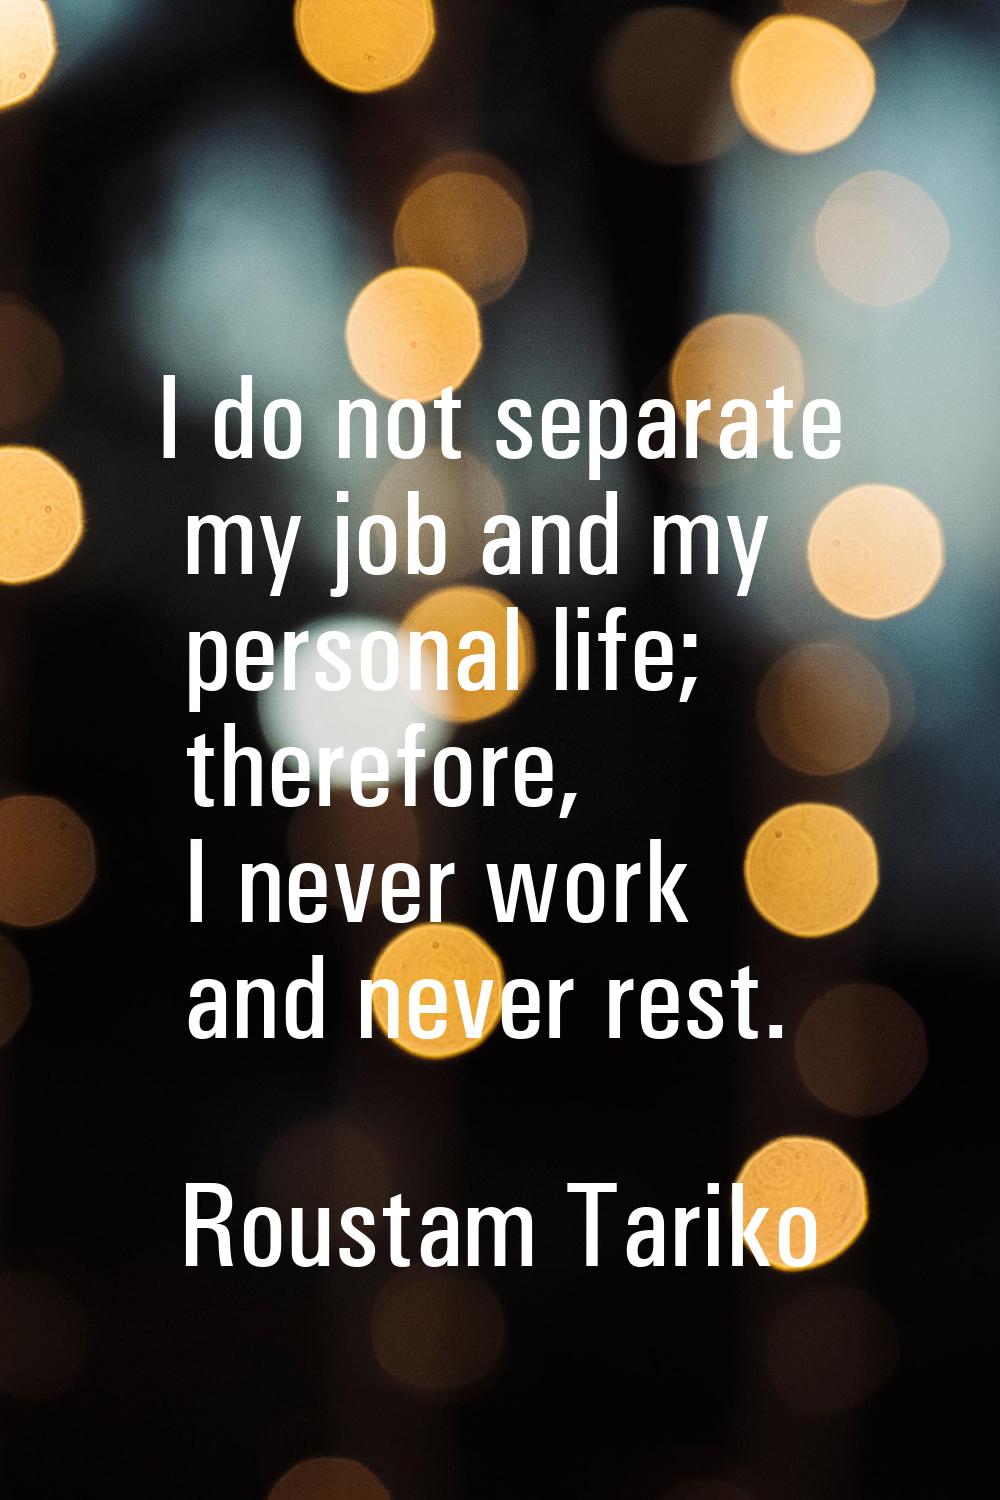 I do not separate my job and my personal life; therefore, I never work and never rest.